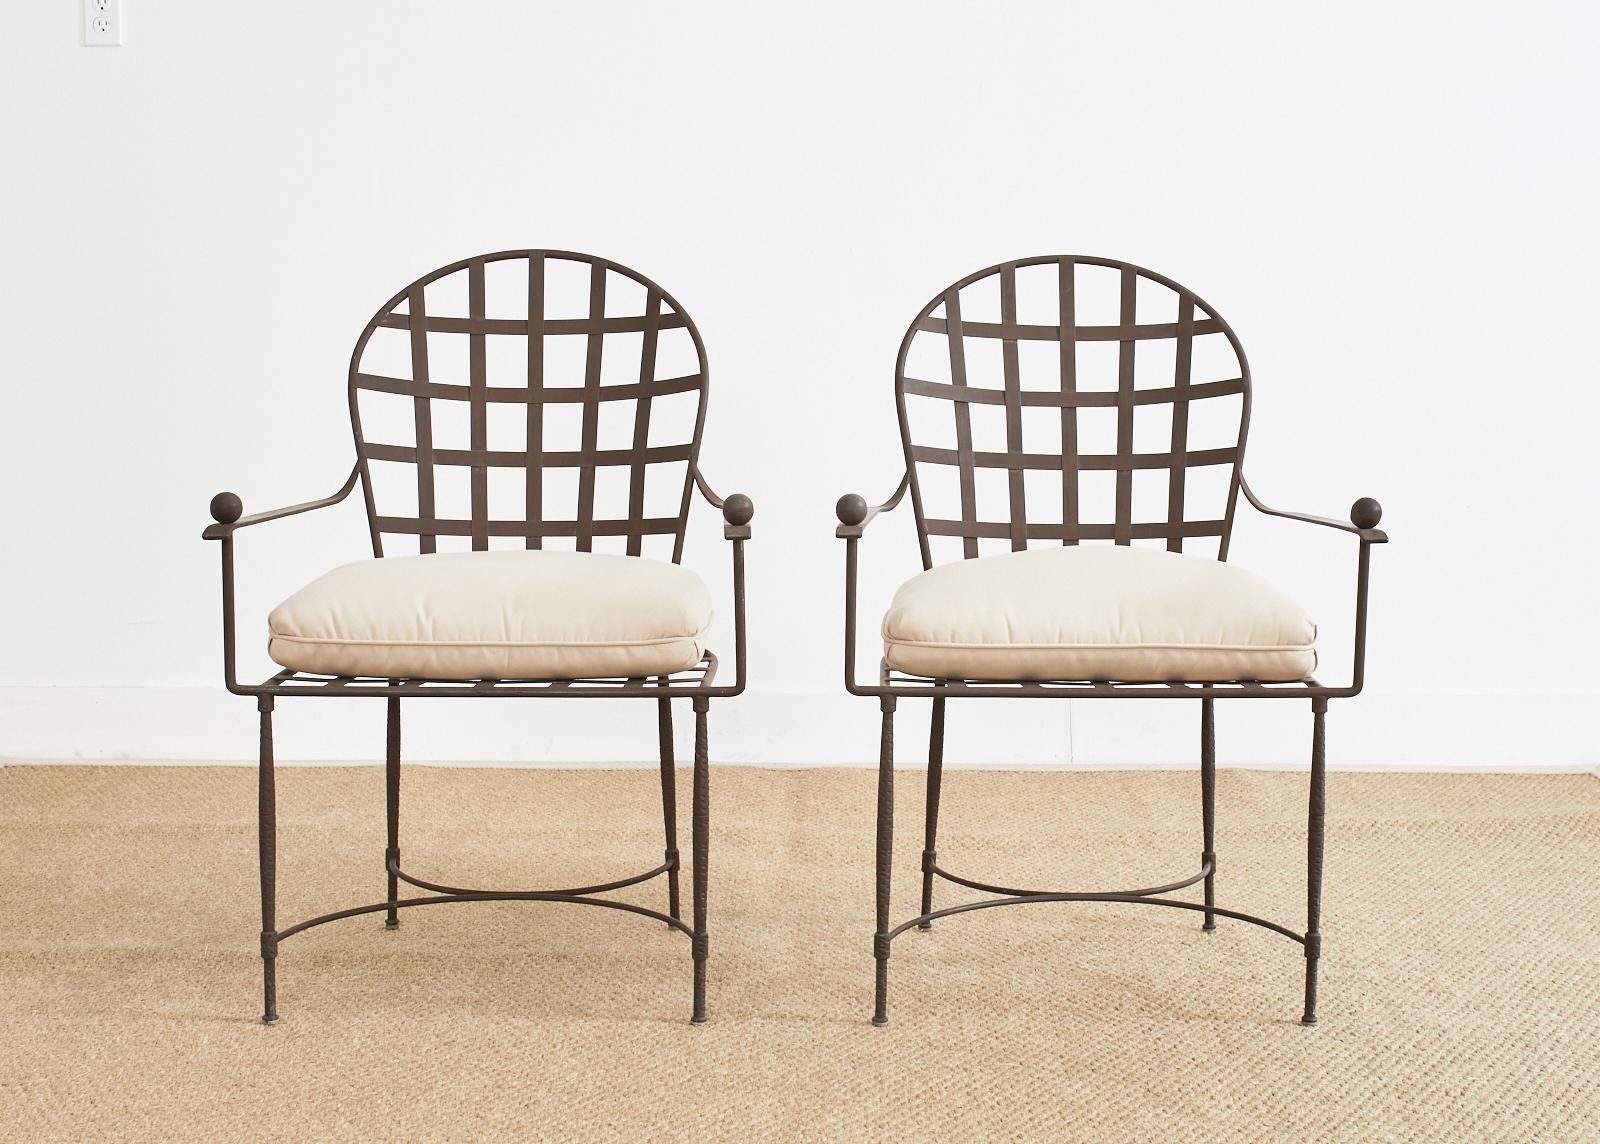 Hand-Crafted Set of Six Mario Papperzini for John Salterini Iron Garden Chairs